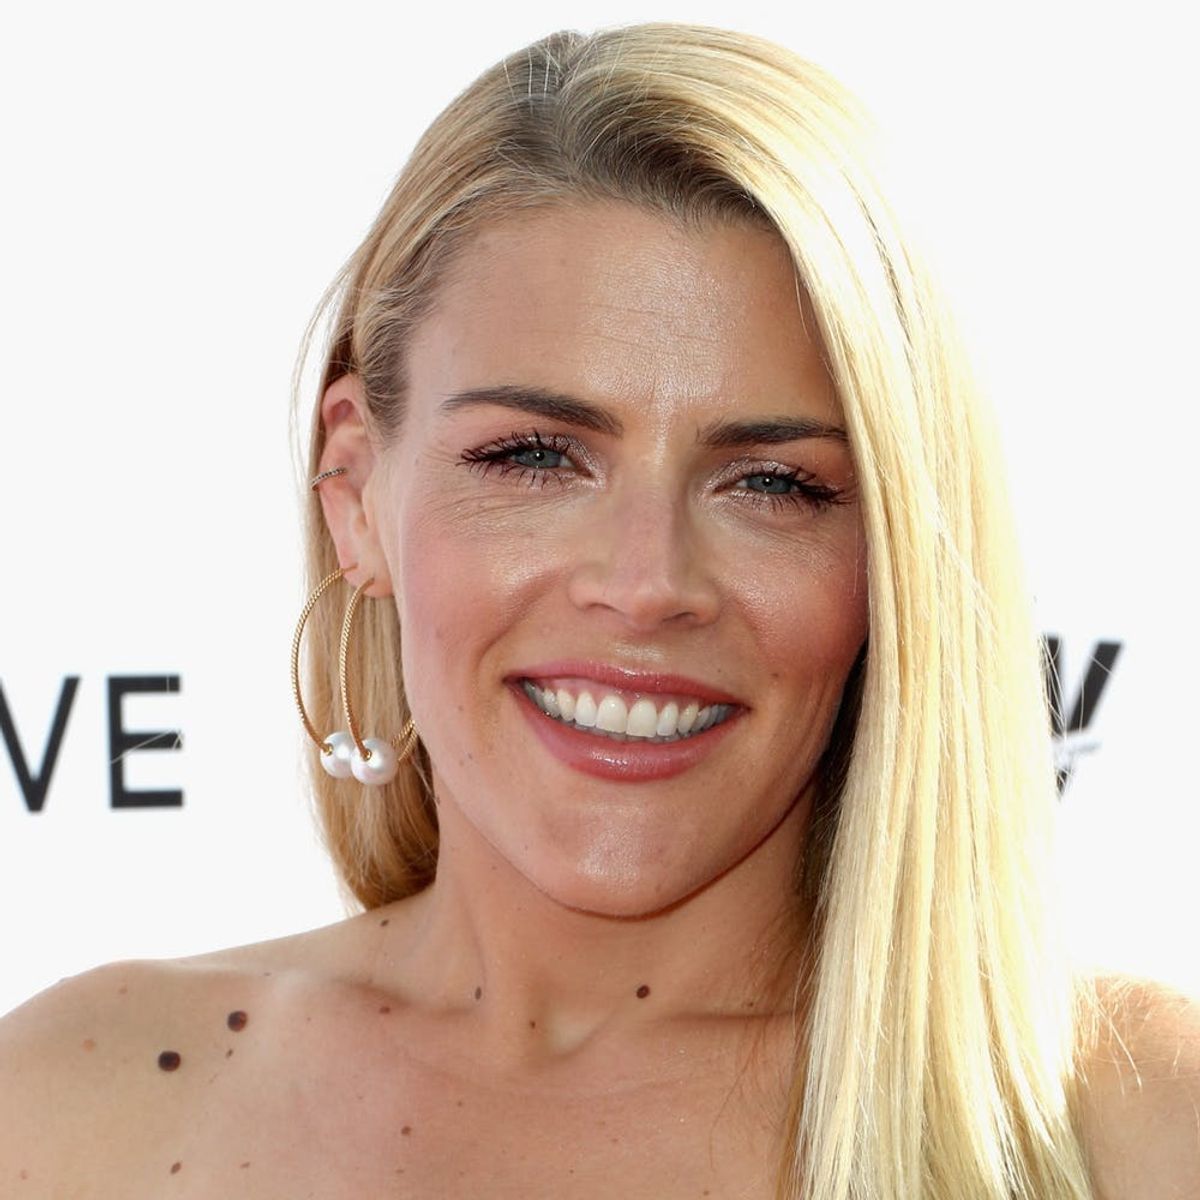 Busy Philipps Wore Her Mom’s Wedding Dress As a Gift for Her Parents’ 50th Anniversary